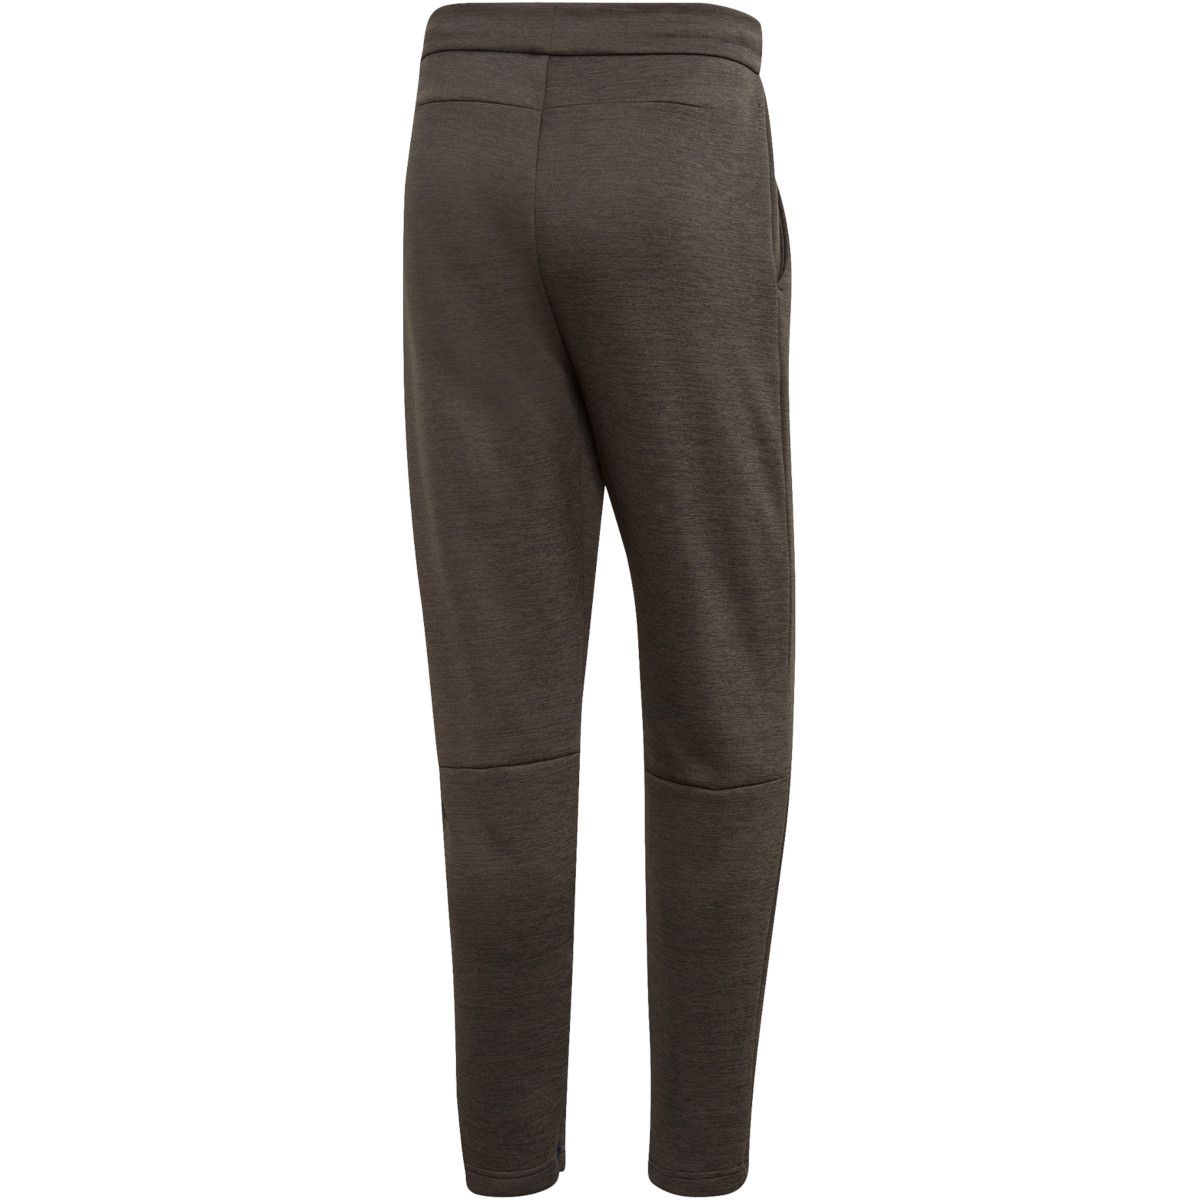 adidas Z.N.E. Tapered Men's Pants EB5229